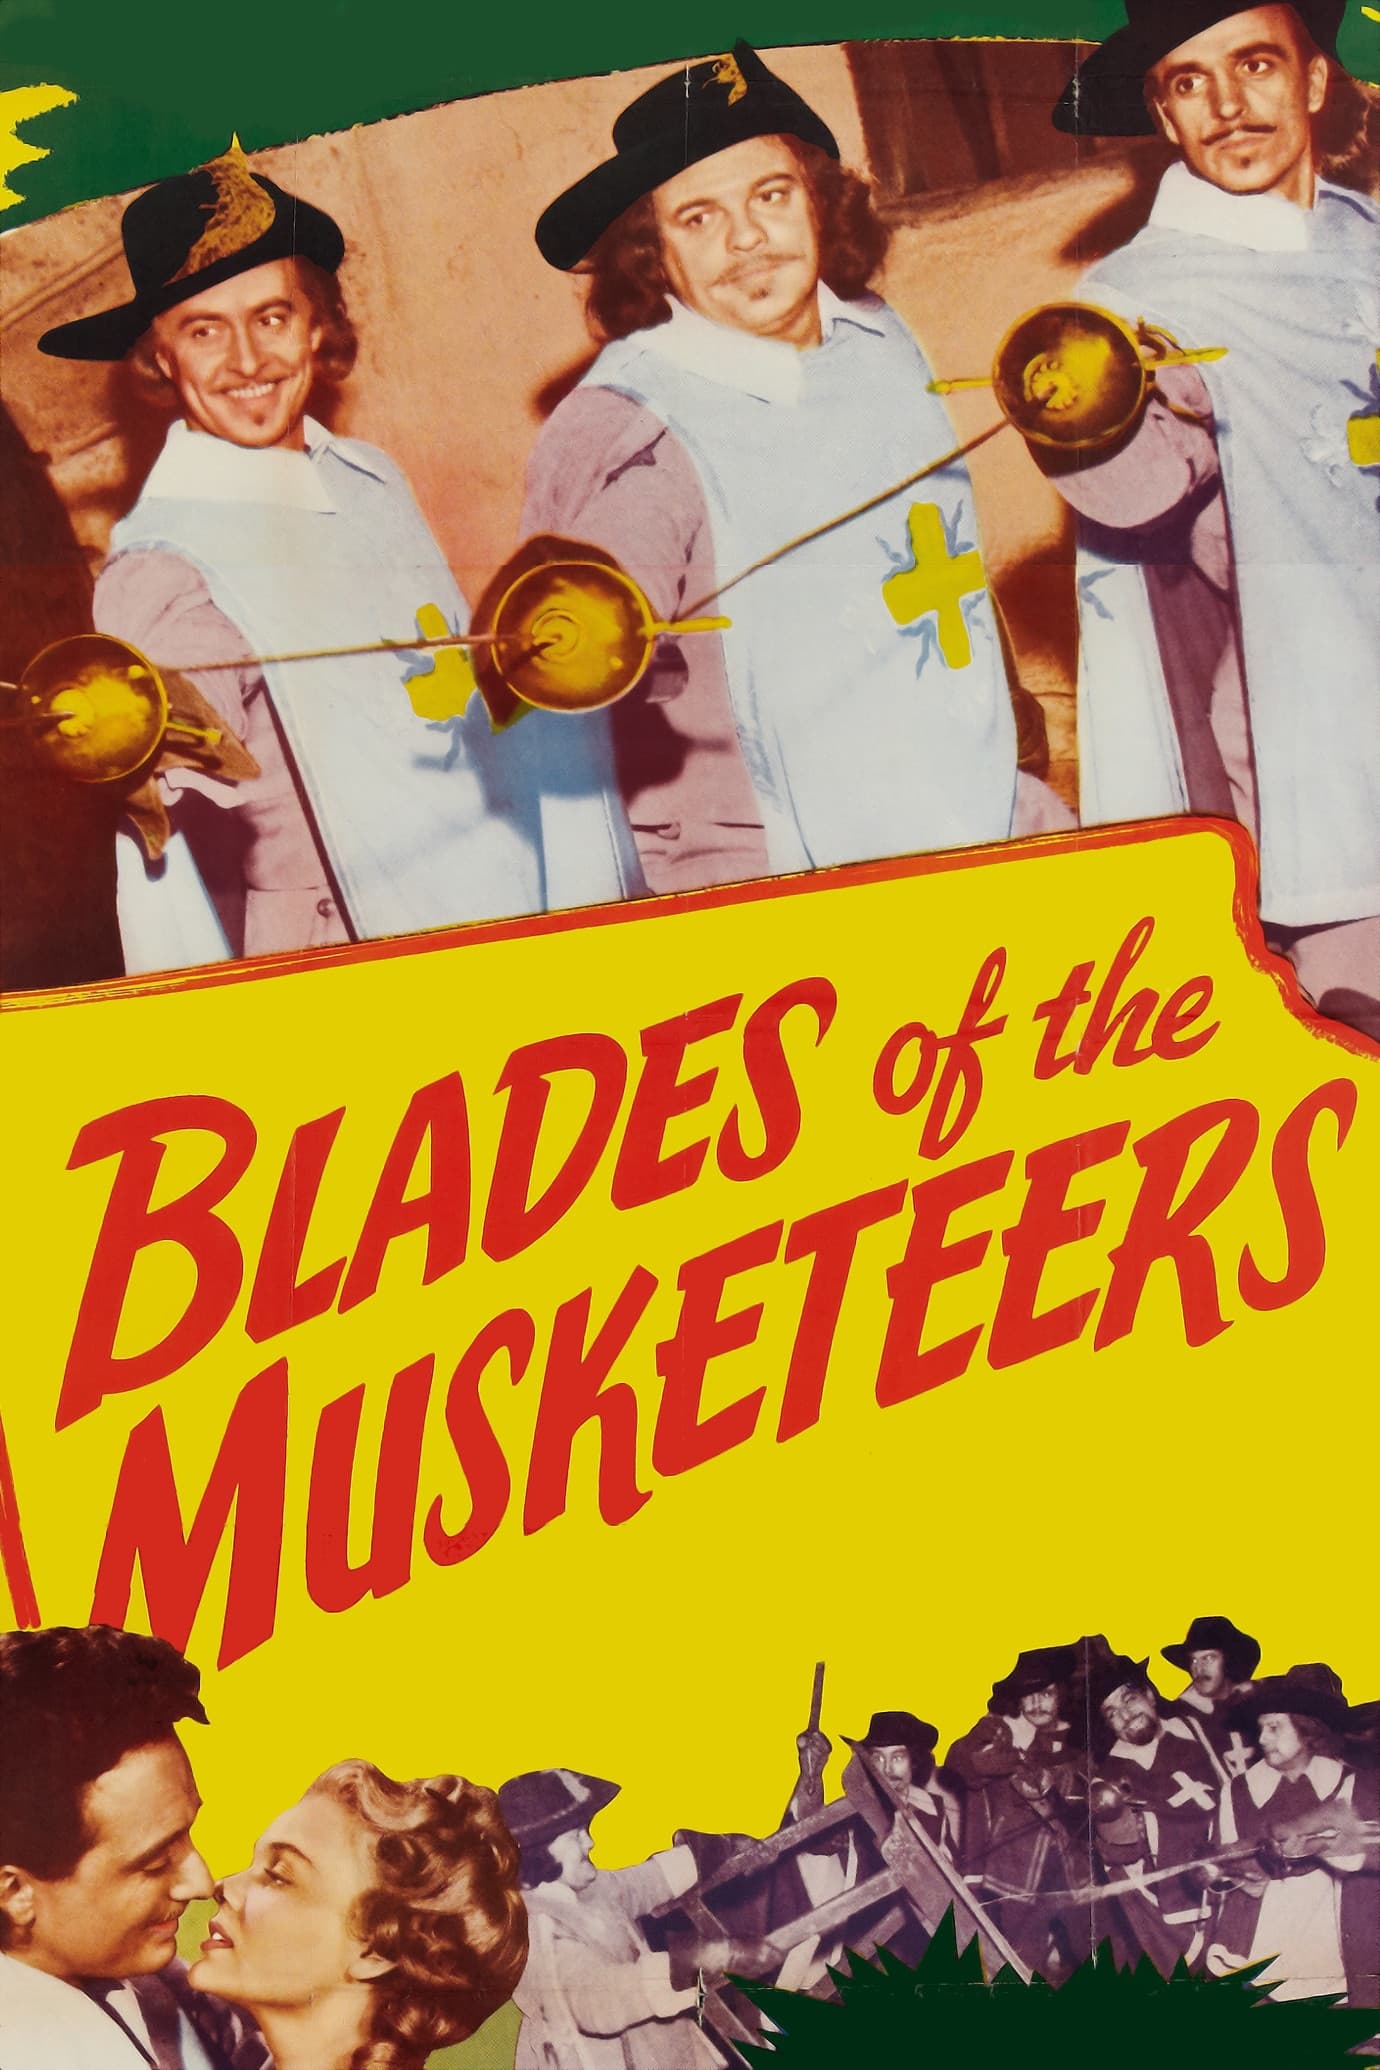 Blades of the Musketeers (1953)